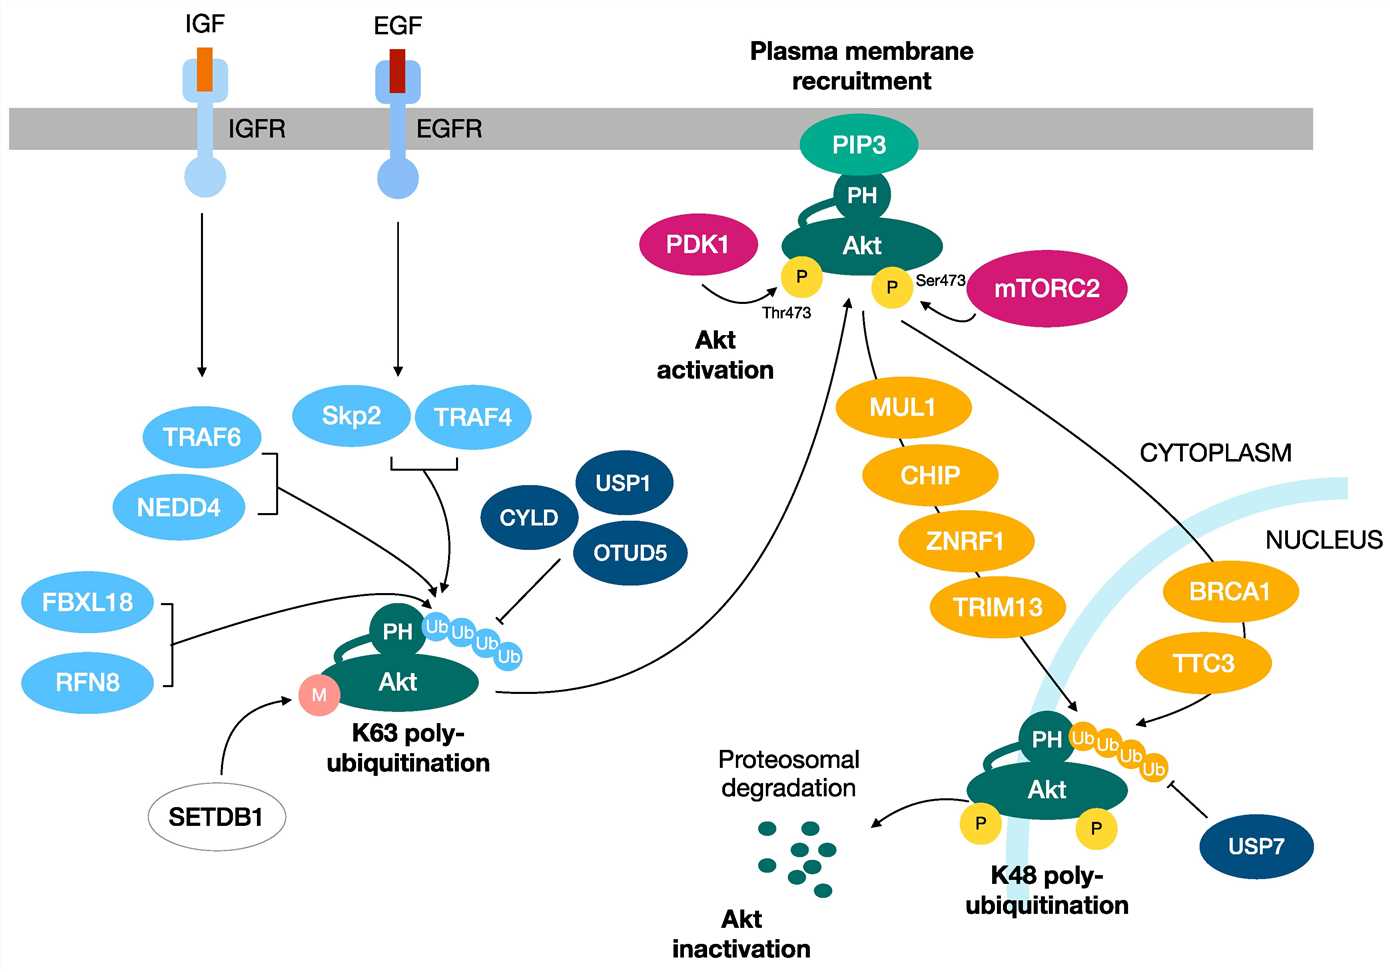 Two distinct ubiquitination processes regulate the activation and inactivation of Akt kinase.